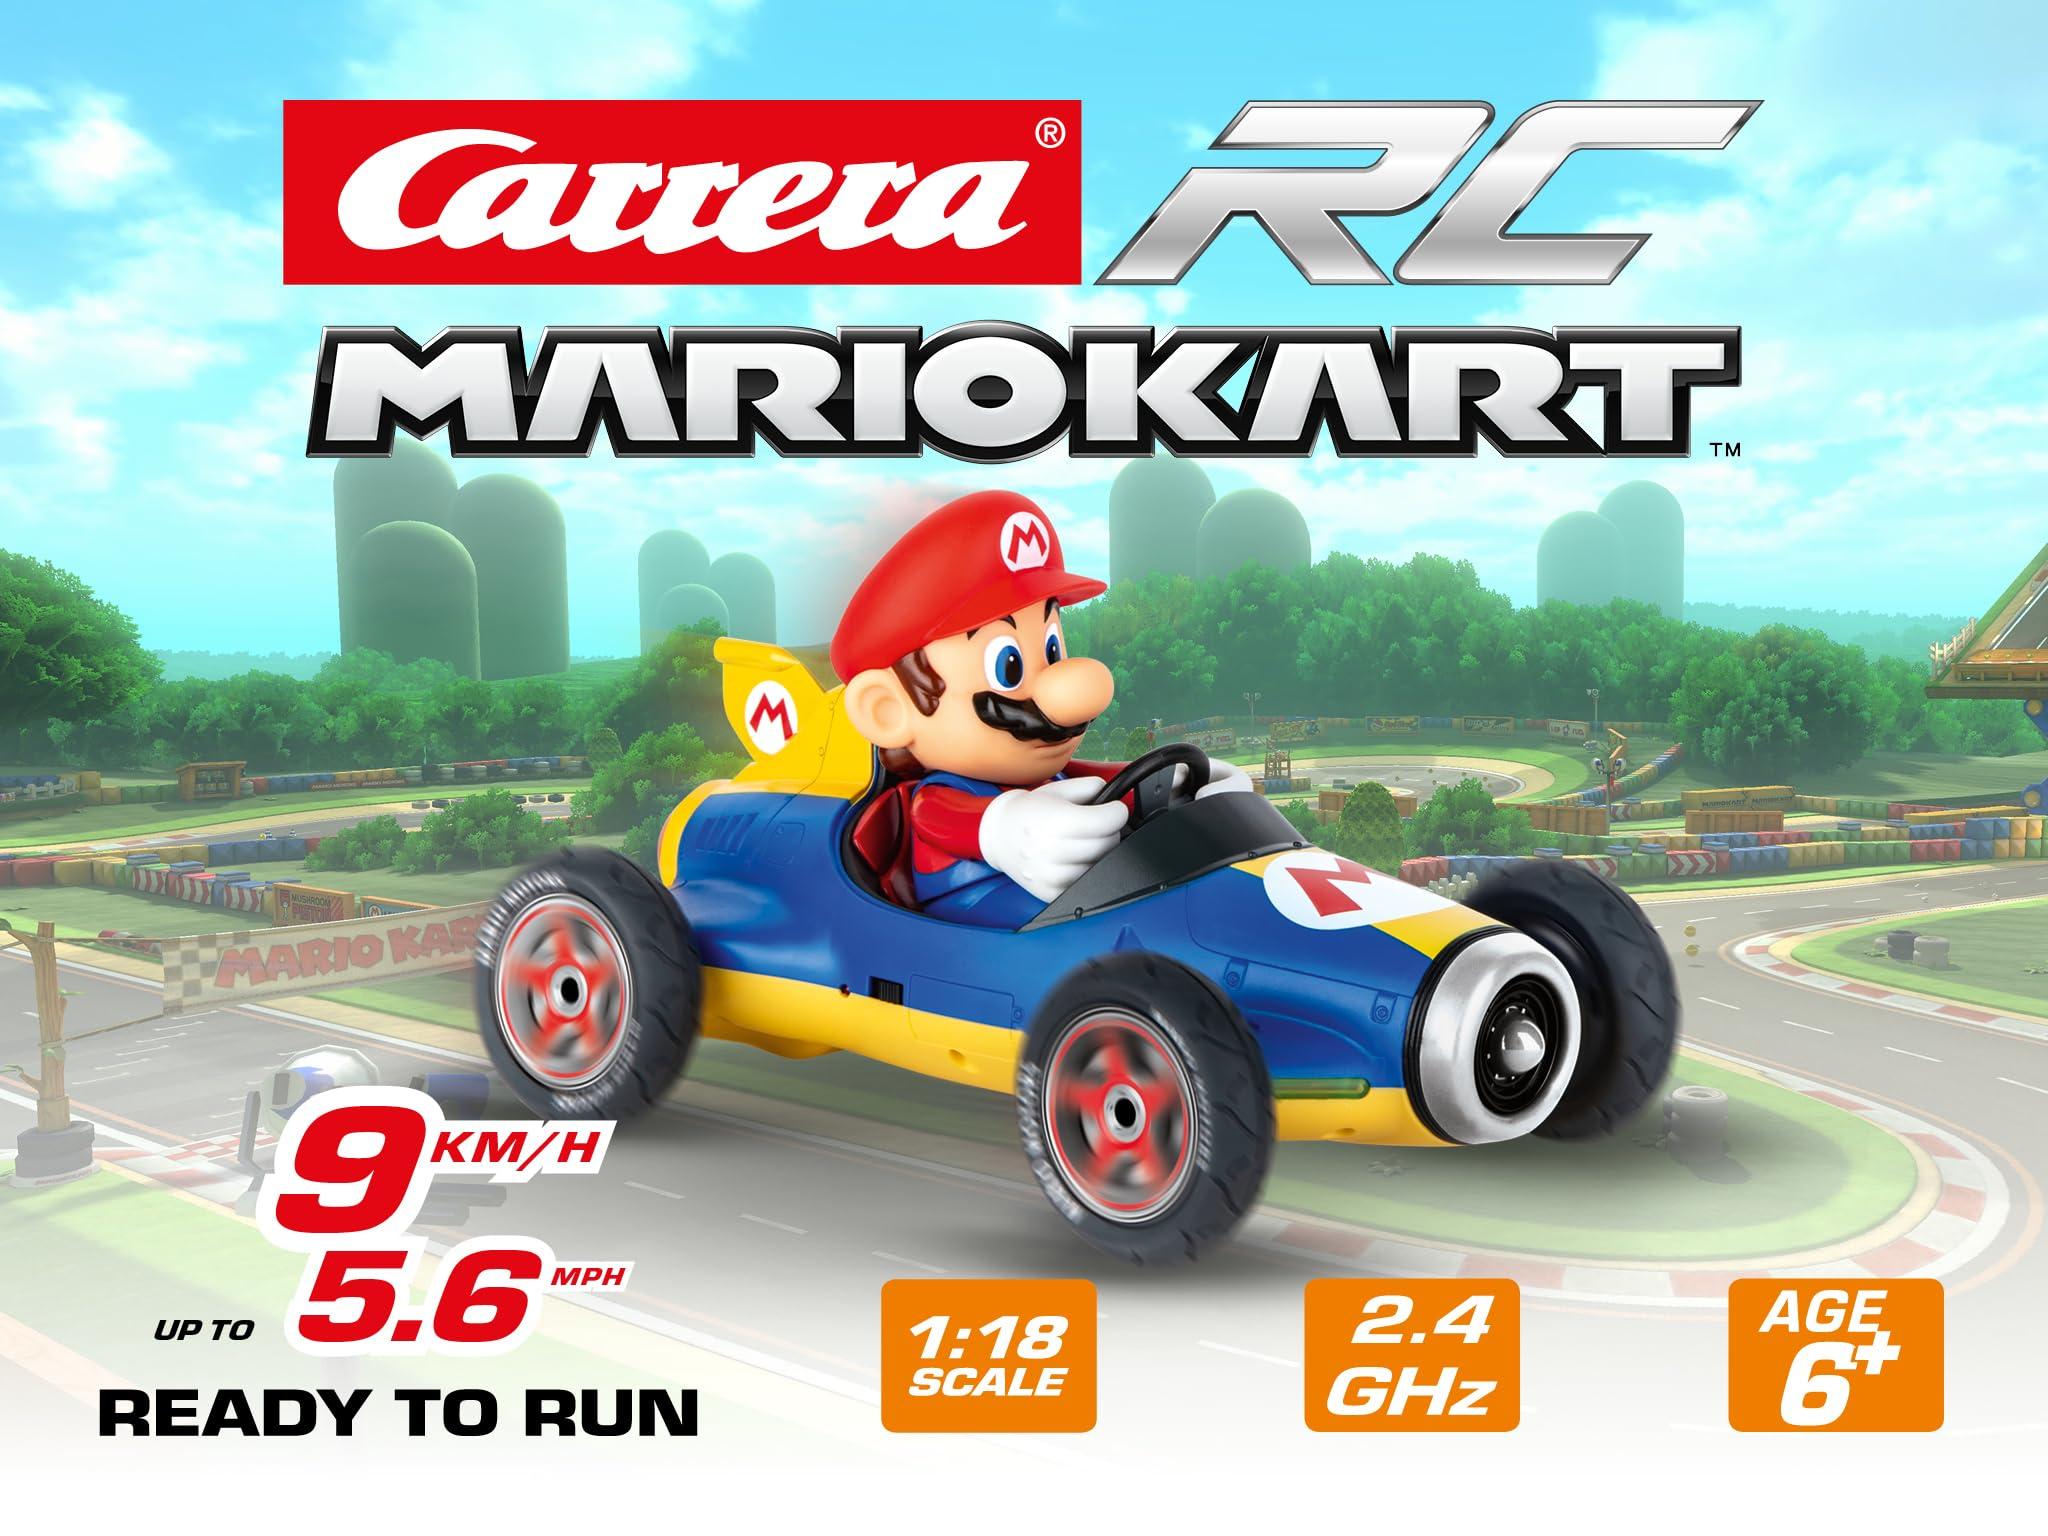 Carrera Mario Kart Remote Control Car: Carrera Mario Kart Remote Control Car: High-Speed Performance and Real Sound Effects